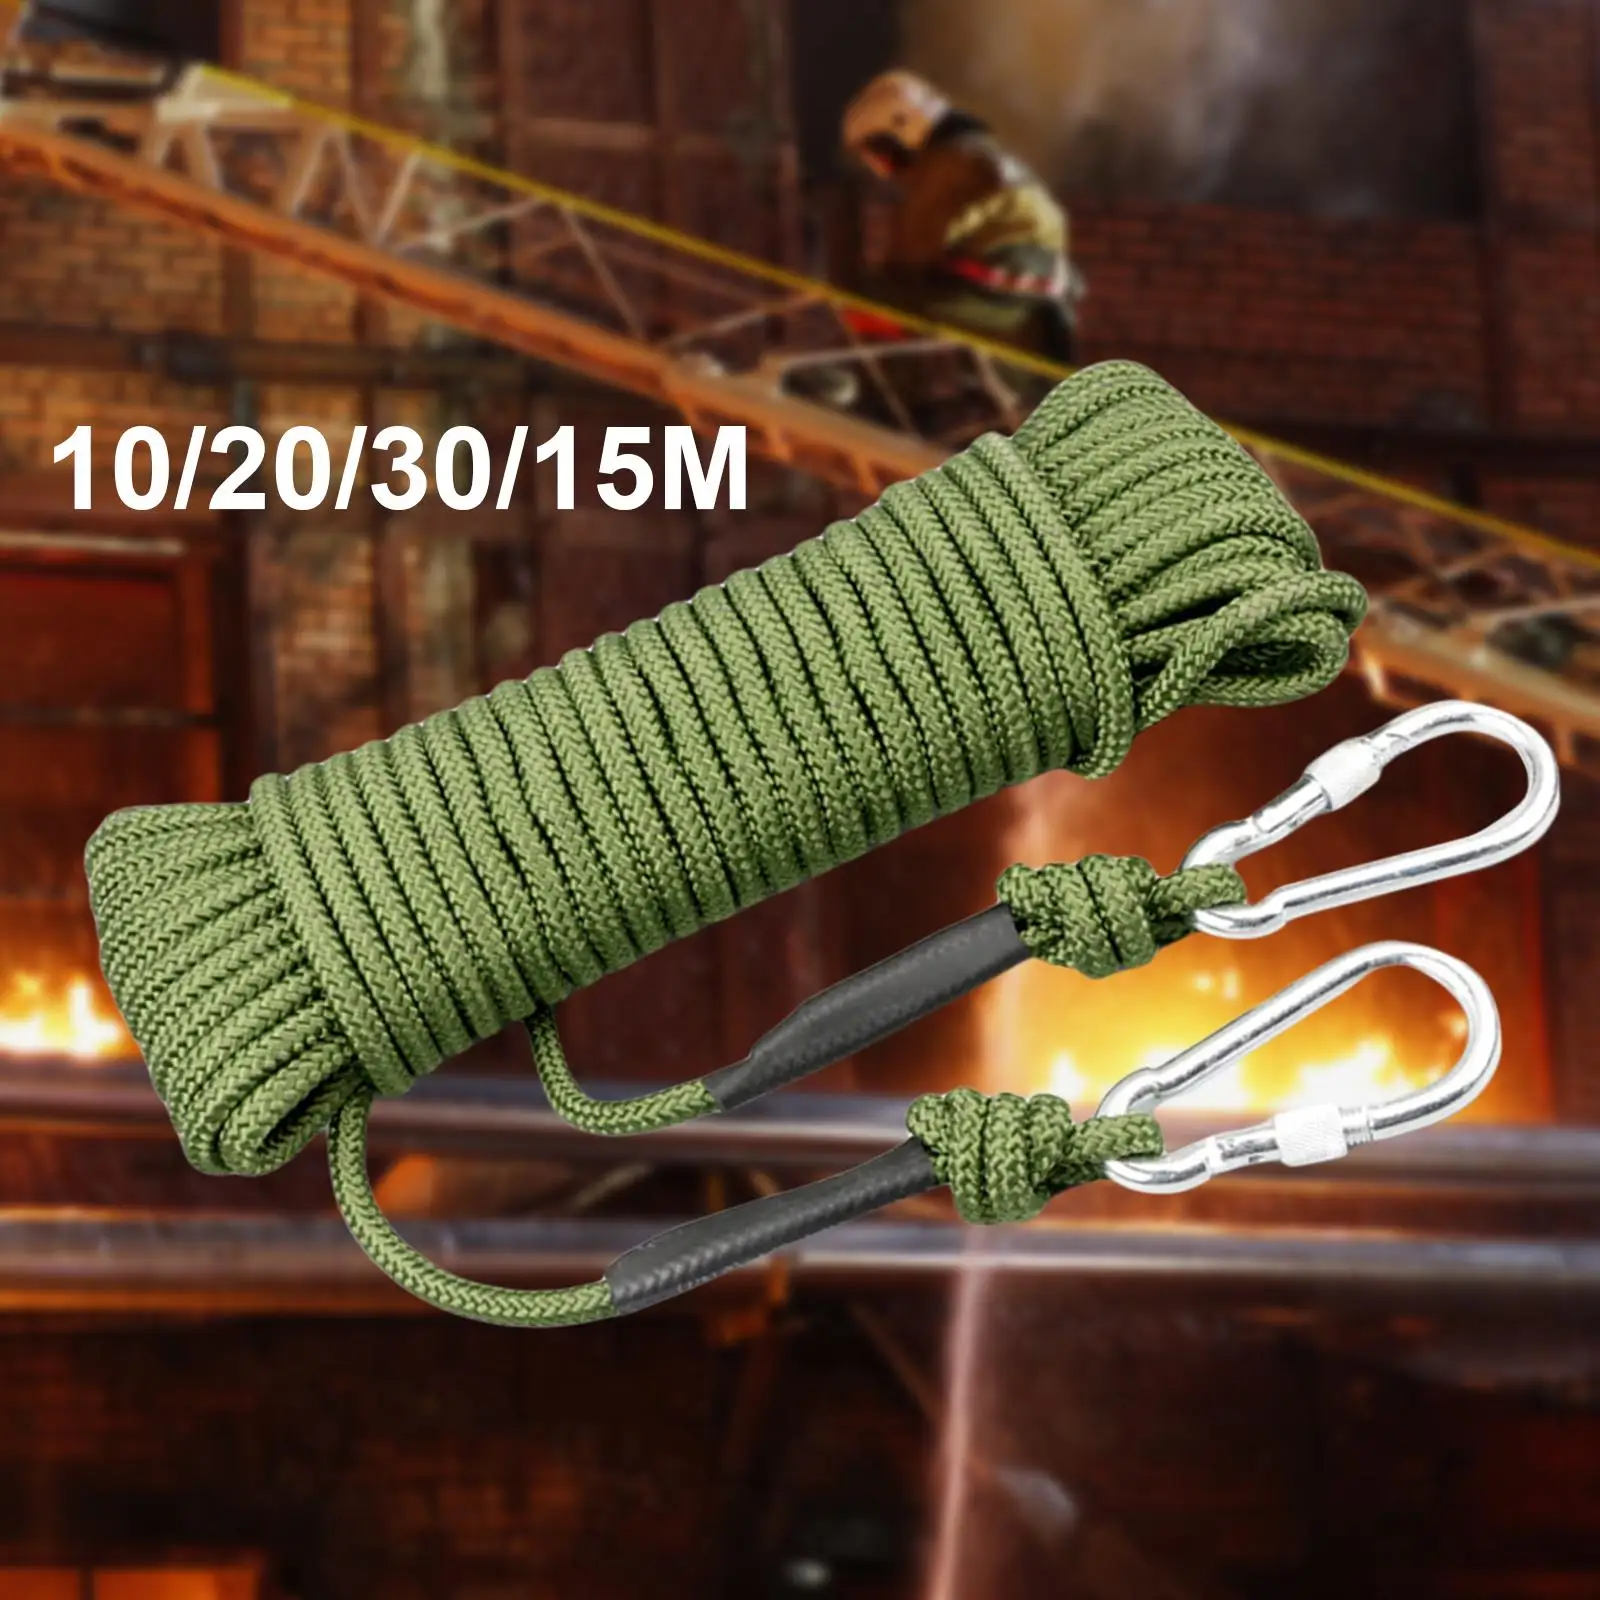 Static Rock Climbing Rope Fire  Rappelling Rope for Mountain Climbing Emergency